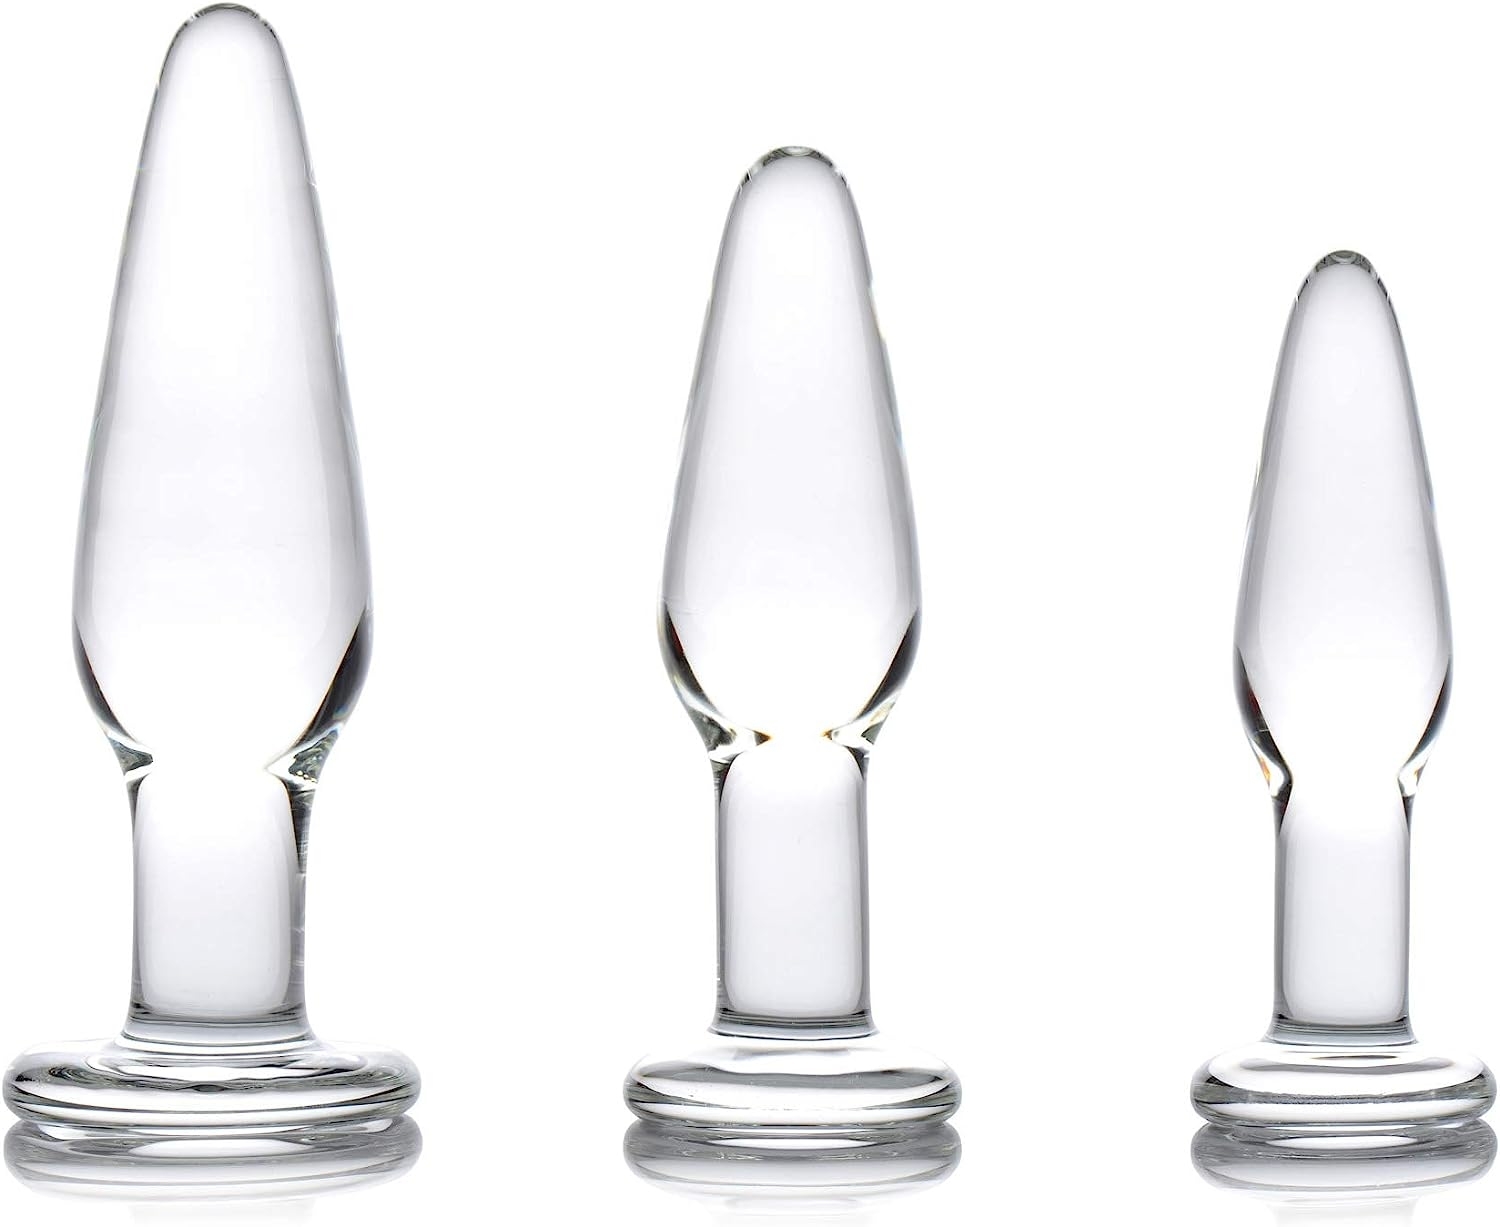 Three glass anal plugs in graduated sizes